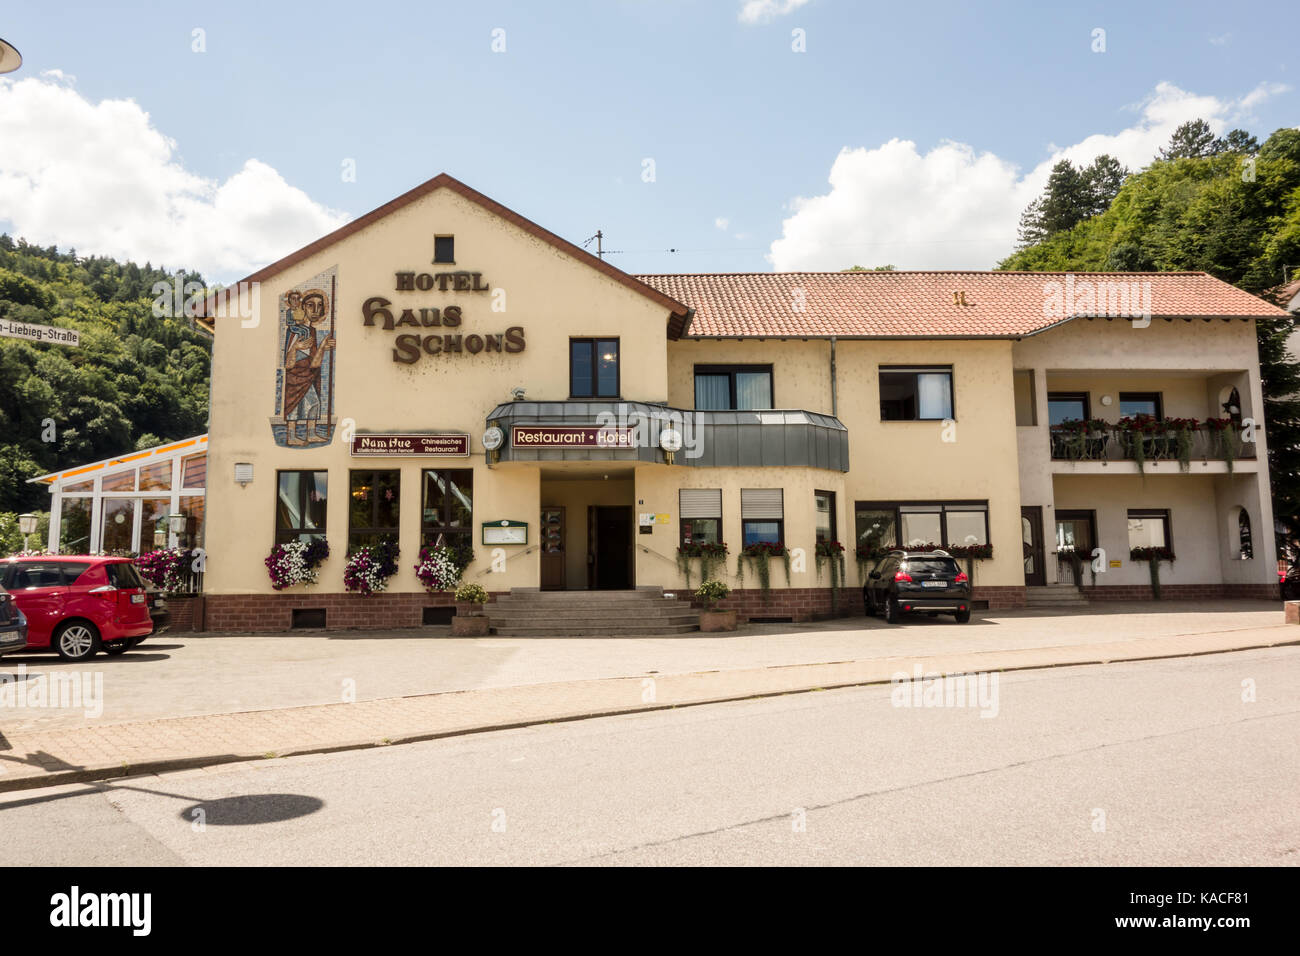 METTLACH, GERMANY - 6TH Aug 17: Hotel Haus Scnons is three star hotel located near the River Moselle. Stock Photo